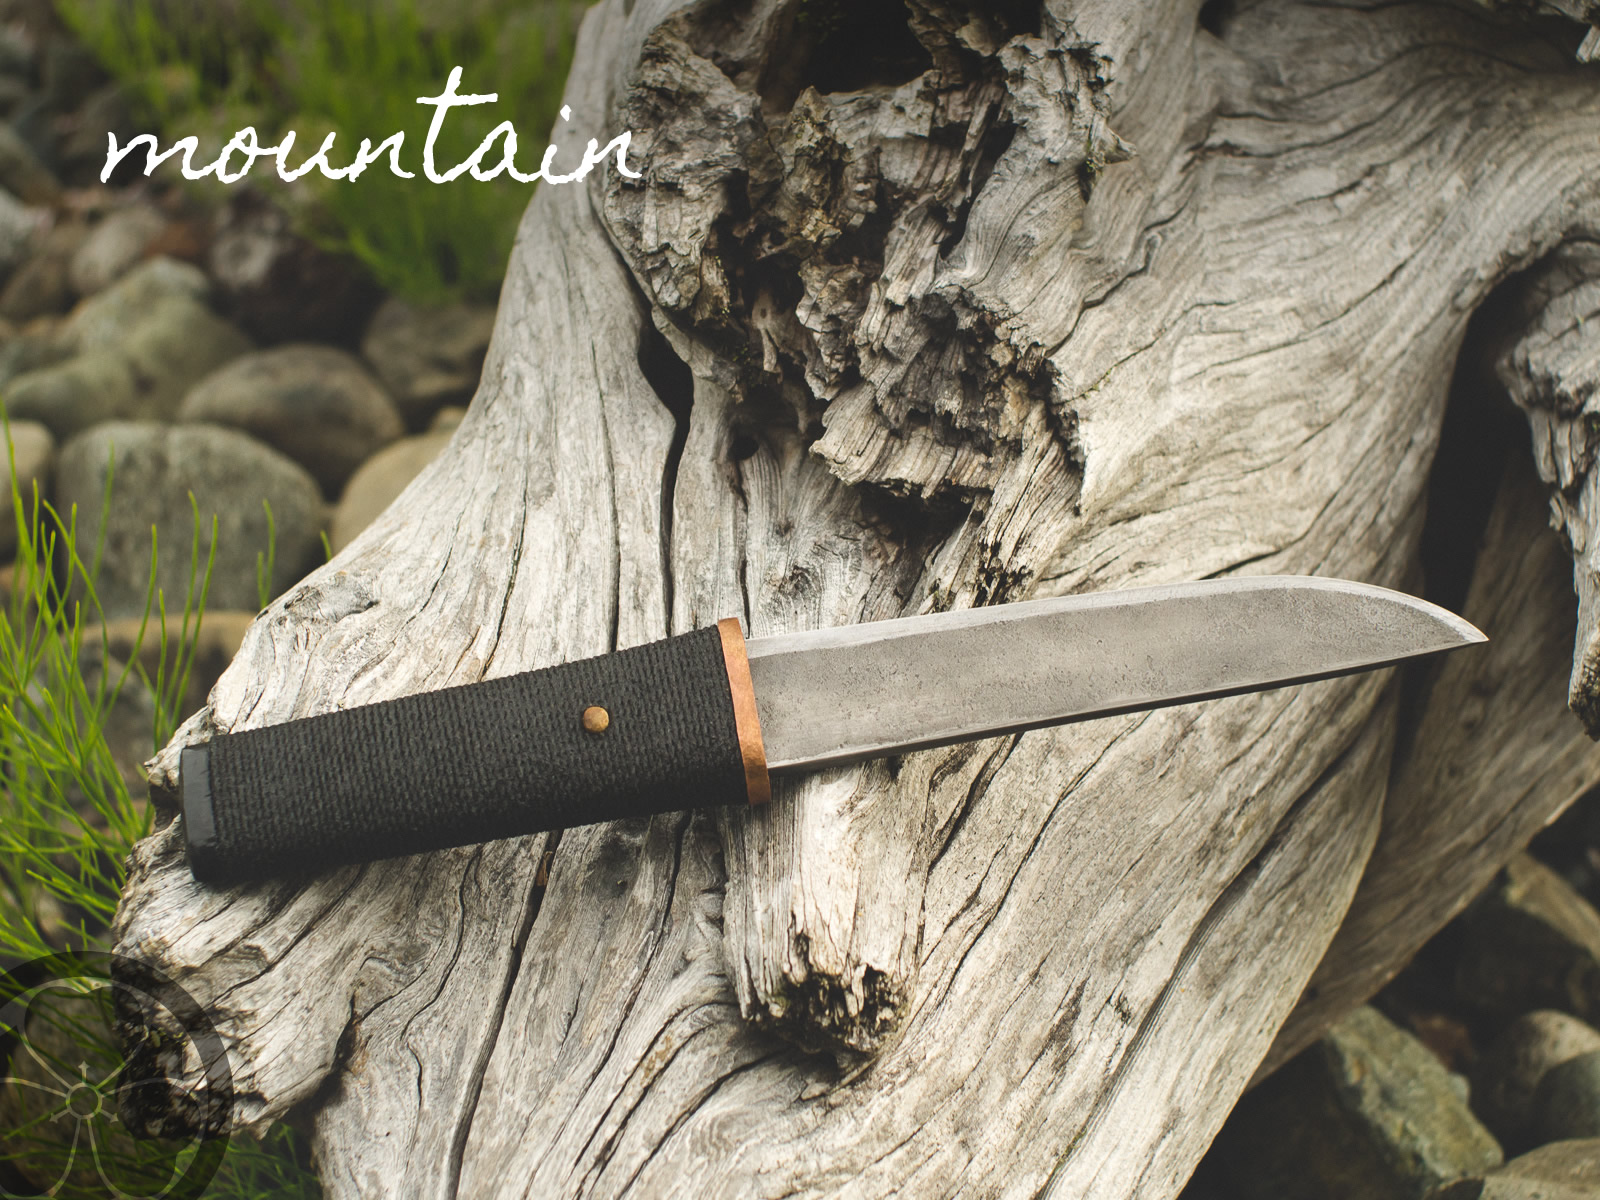 Tools for Satoyama: Design your own knife, hand crafted on Vancouver Island.